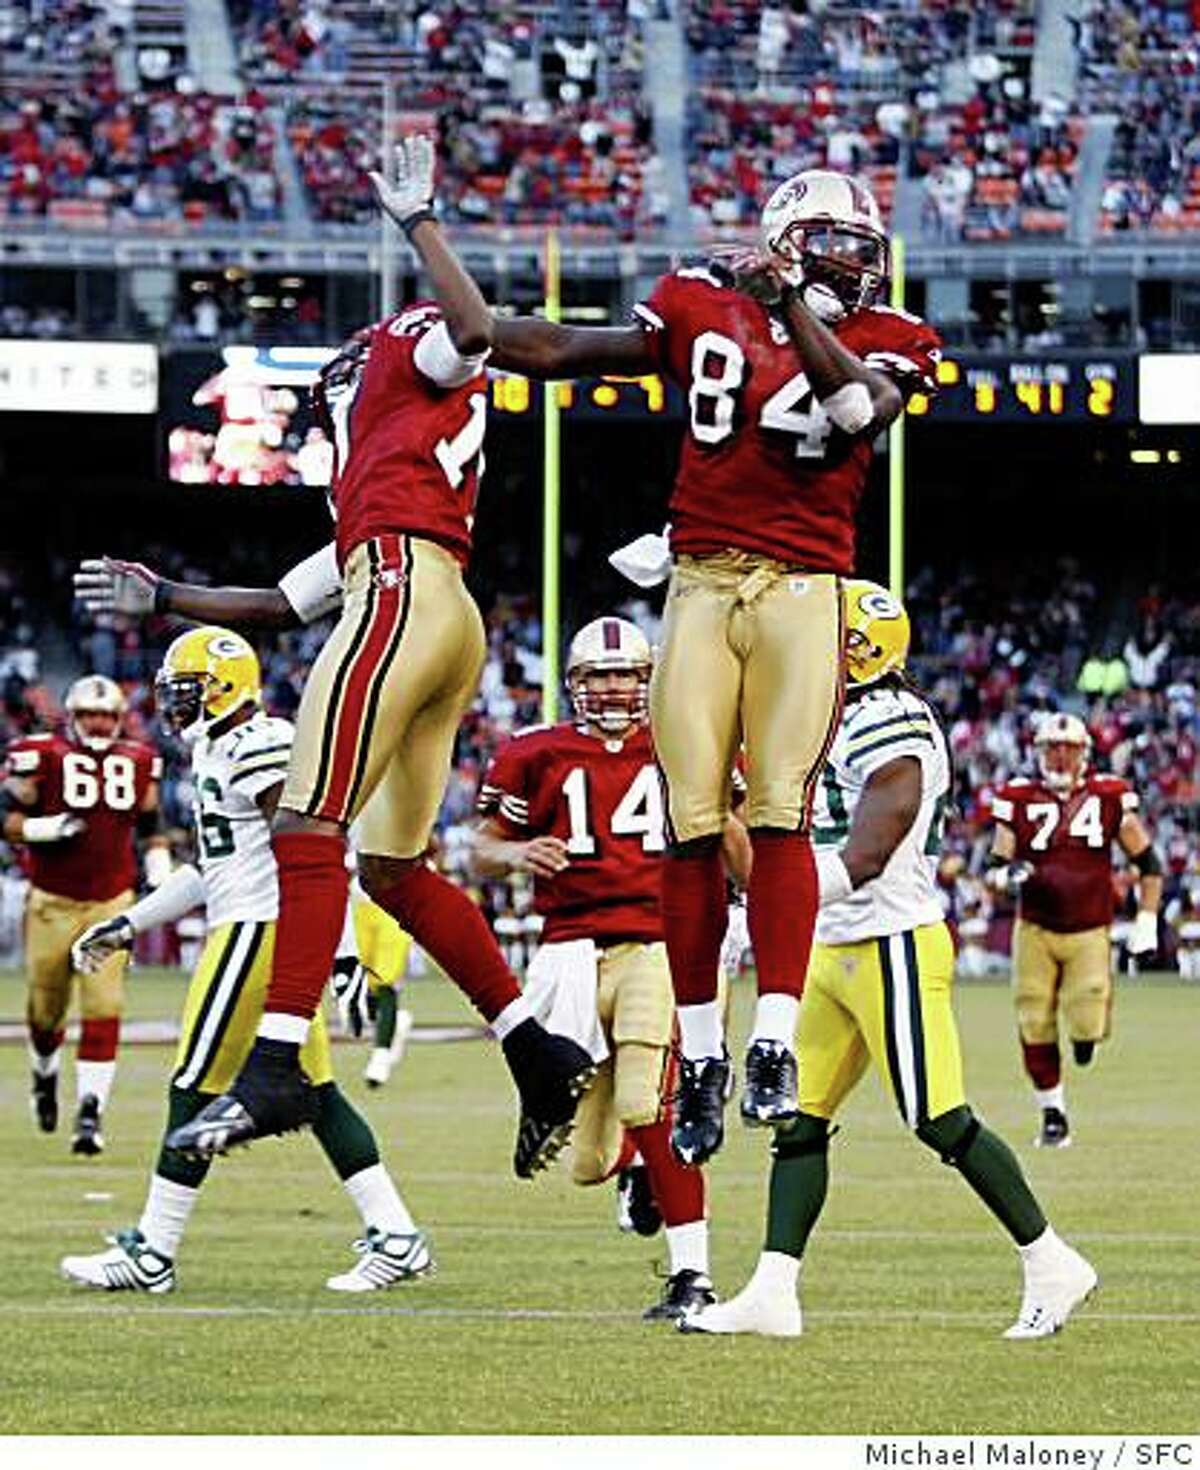 San Francisco 49ers Dominique Zeigler, left and Josh Morgan celebrate Morgan's 2nd quarter TD.The San Francisco 49ers host the Green Bay Packers in an NFL preseason game at Candlestick Park in San Francisco, Calif., on August 16, 2008.